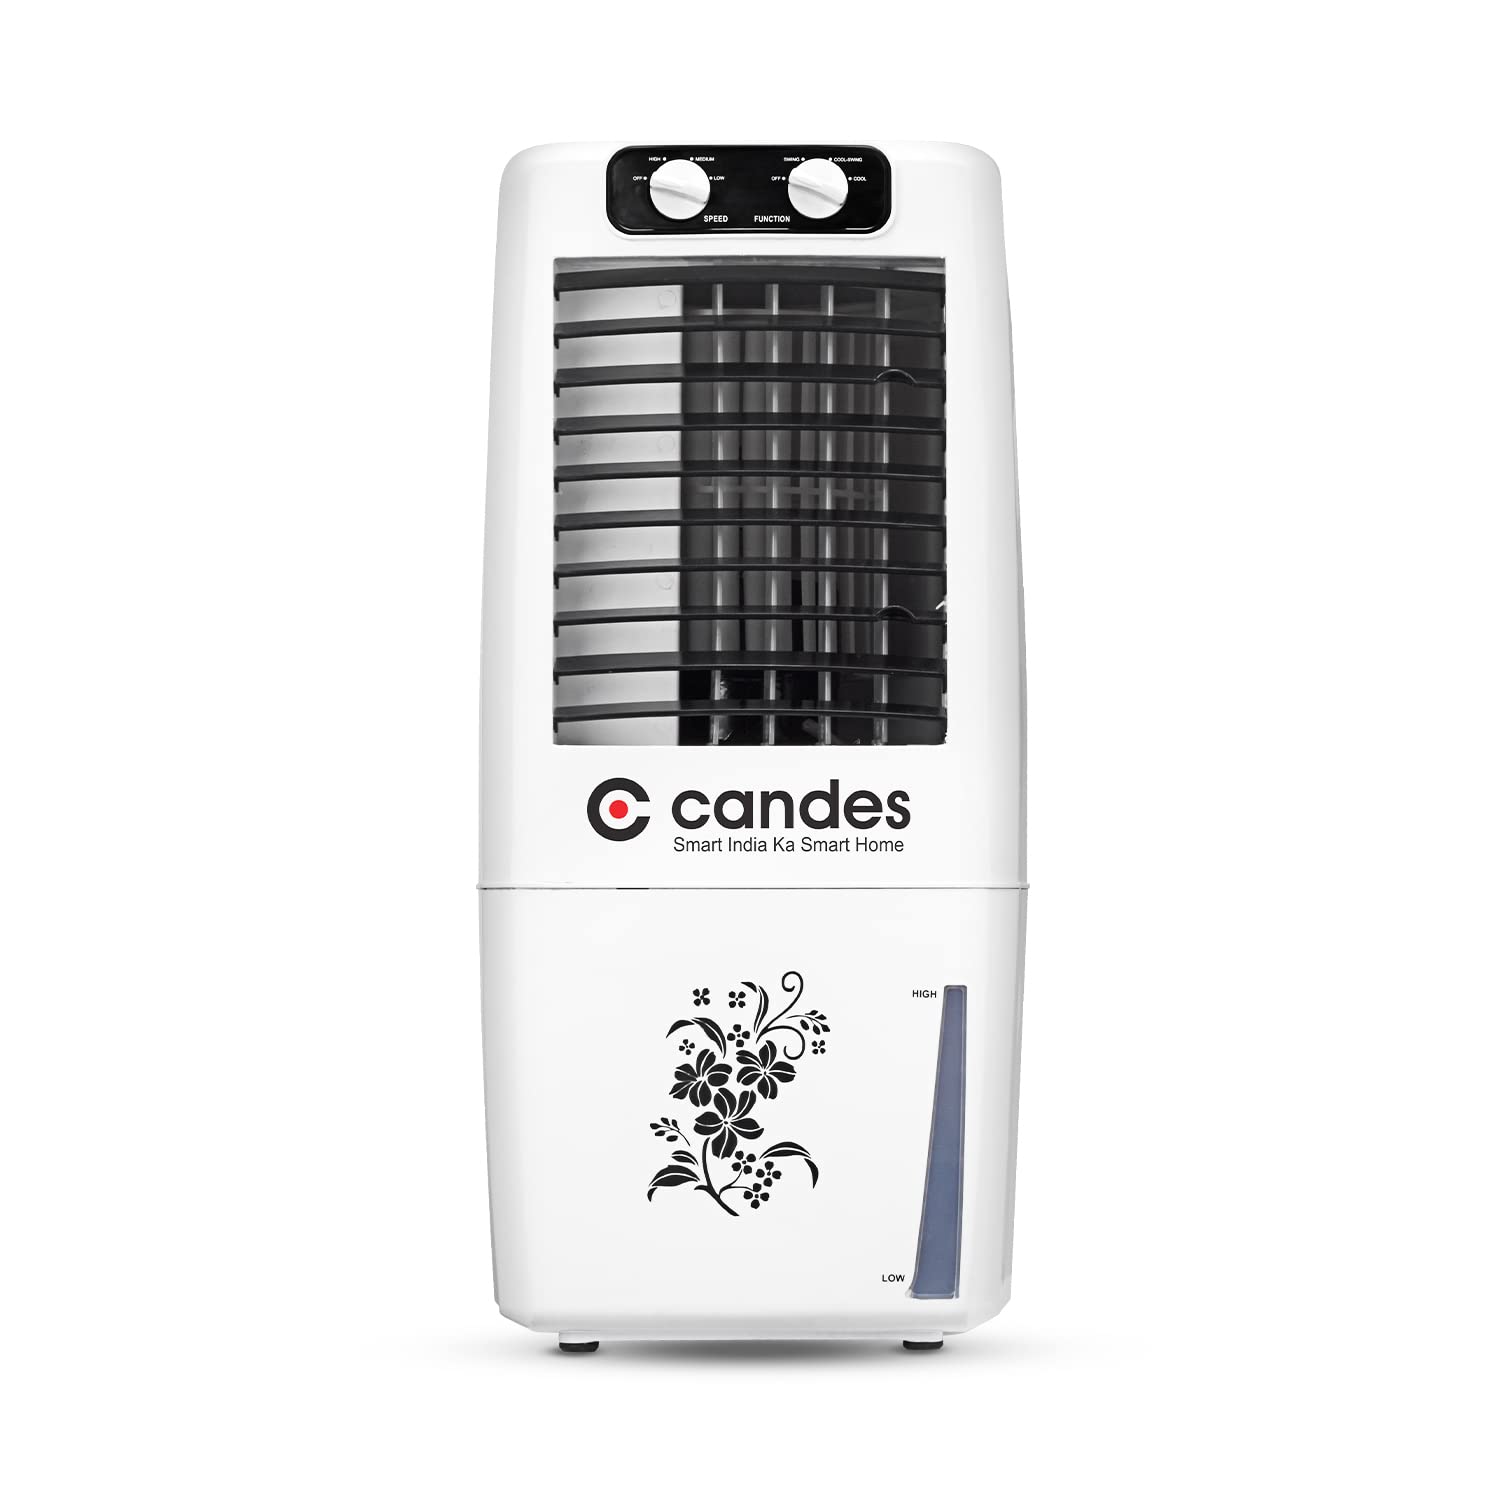 Candes 12 L Portable Mini Air Cooler for Home | High Speed Blower, Ice Chamber, 3 Way Speed Control | Inverter Compatible Air Cooler-offers & Discounts- 